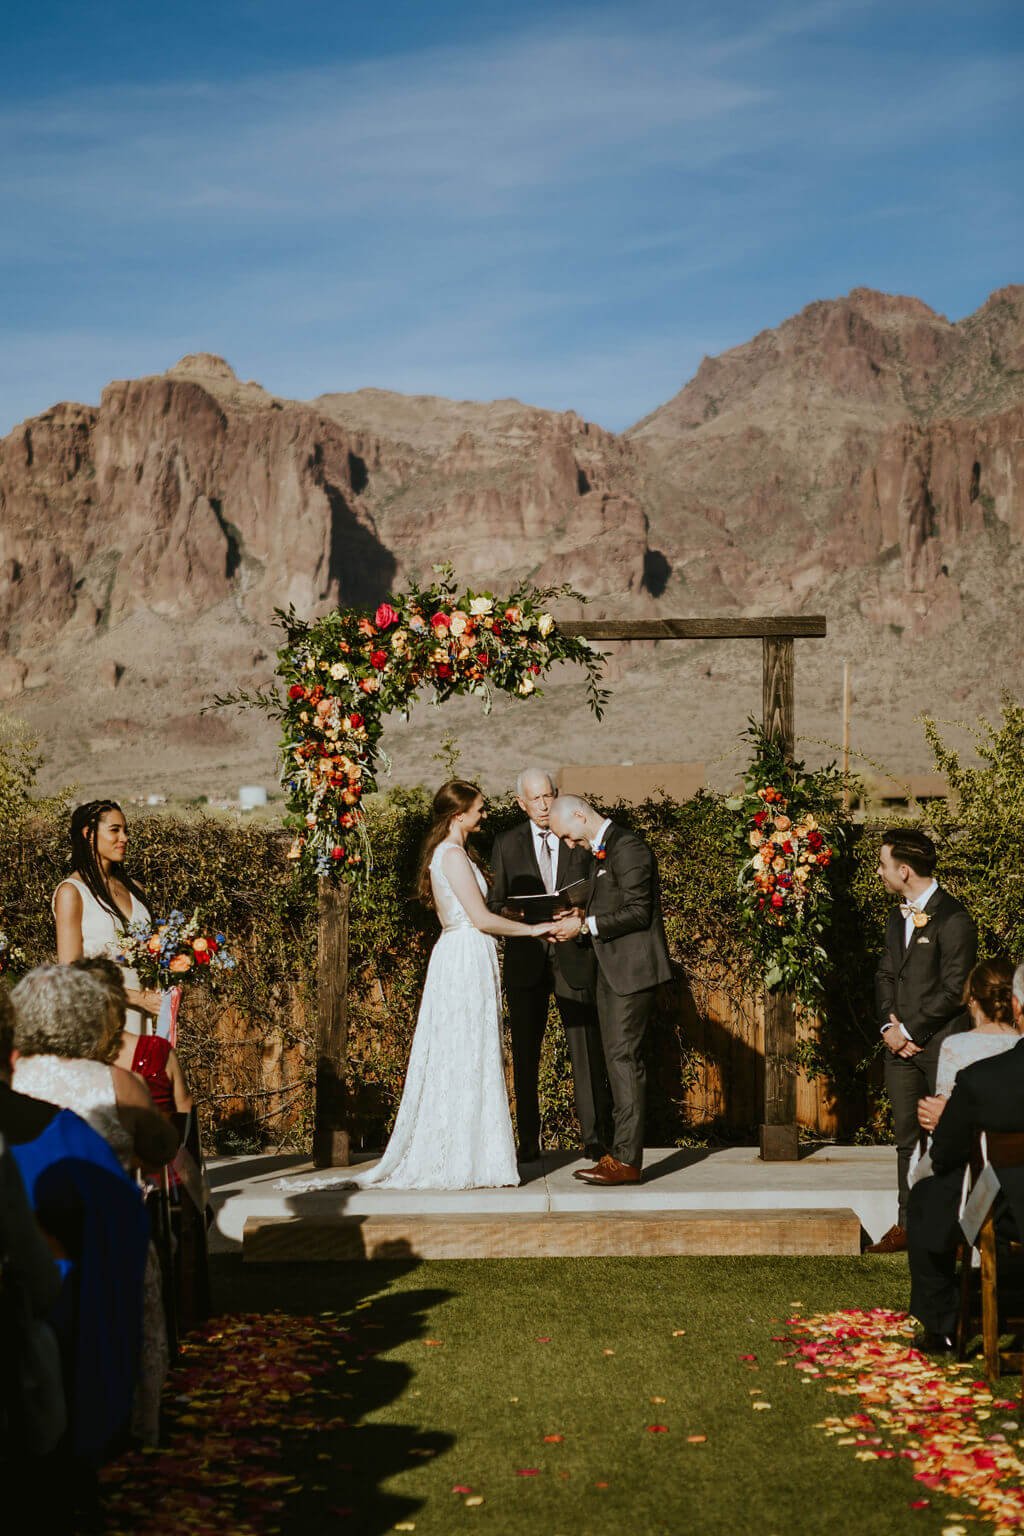 Bride and groom standing under arbor with mountains in the background at Arizona desert wedding